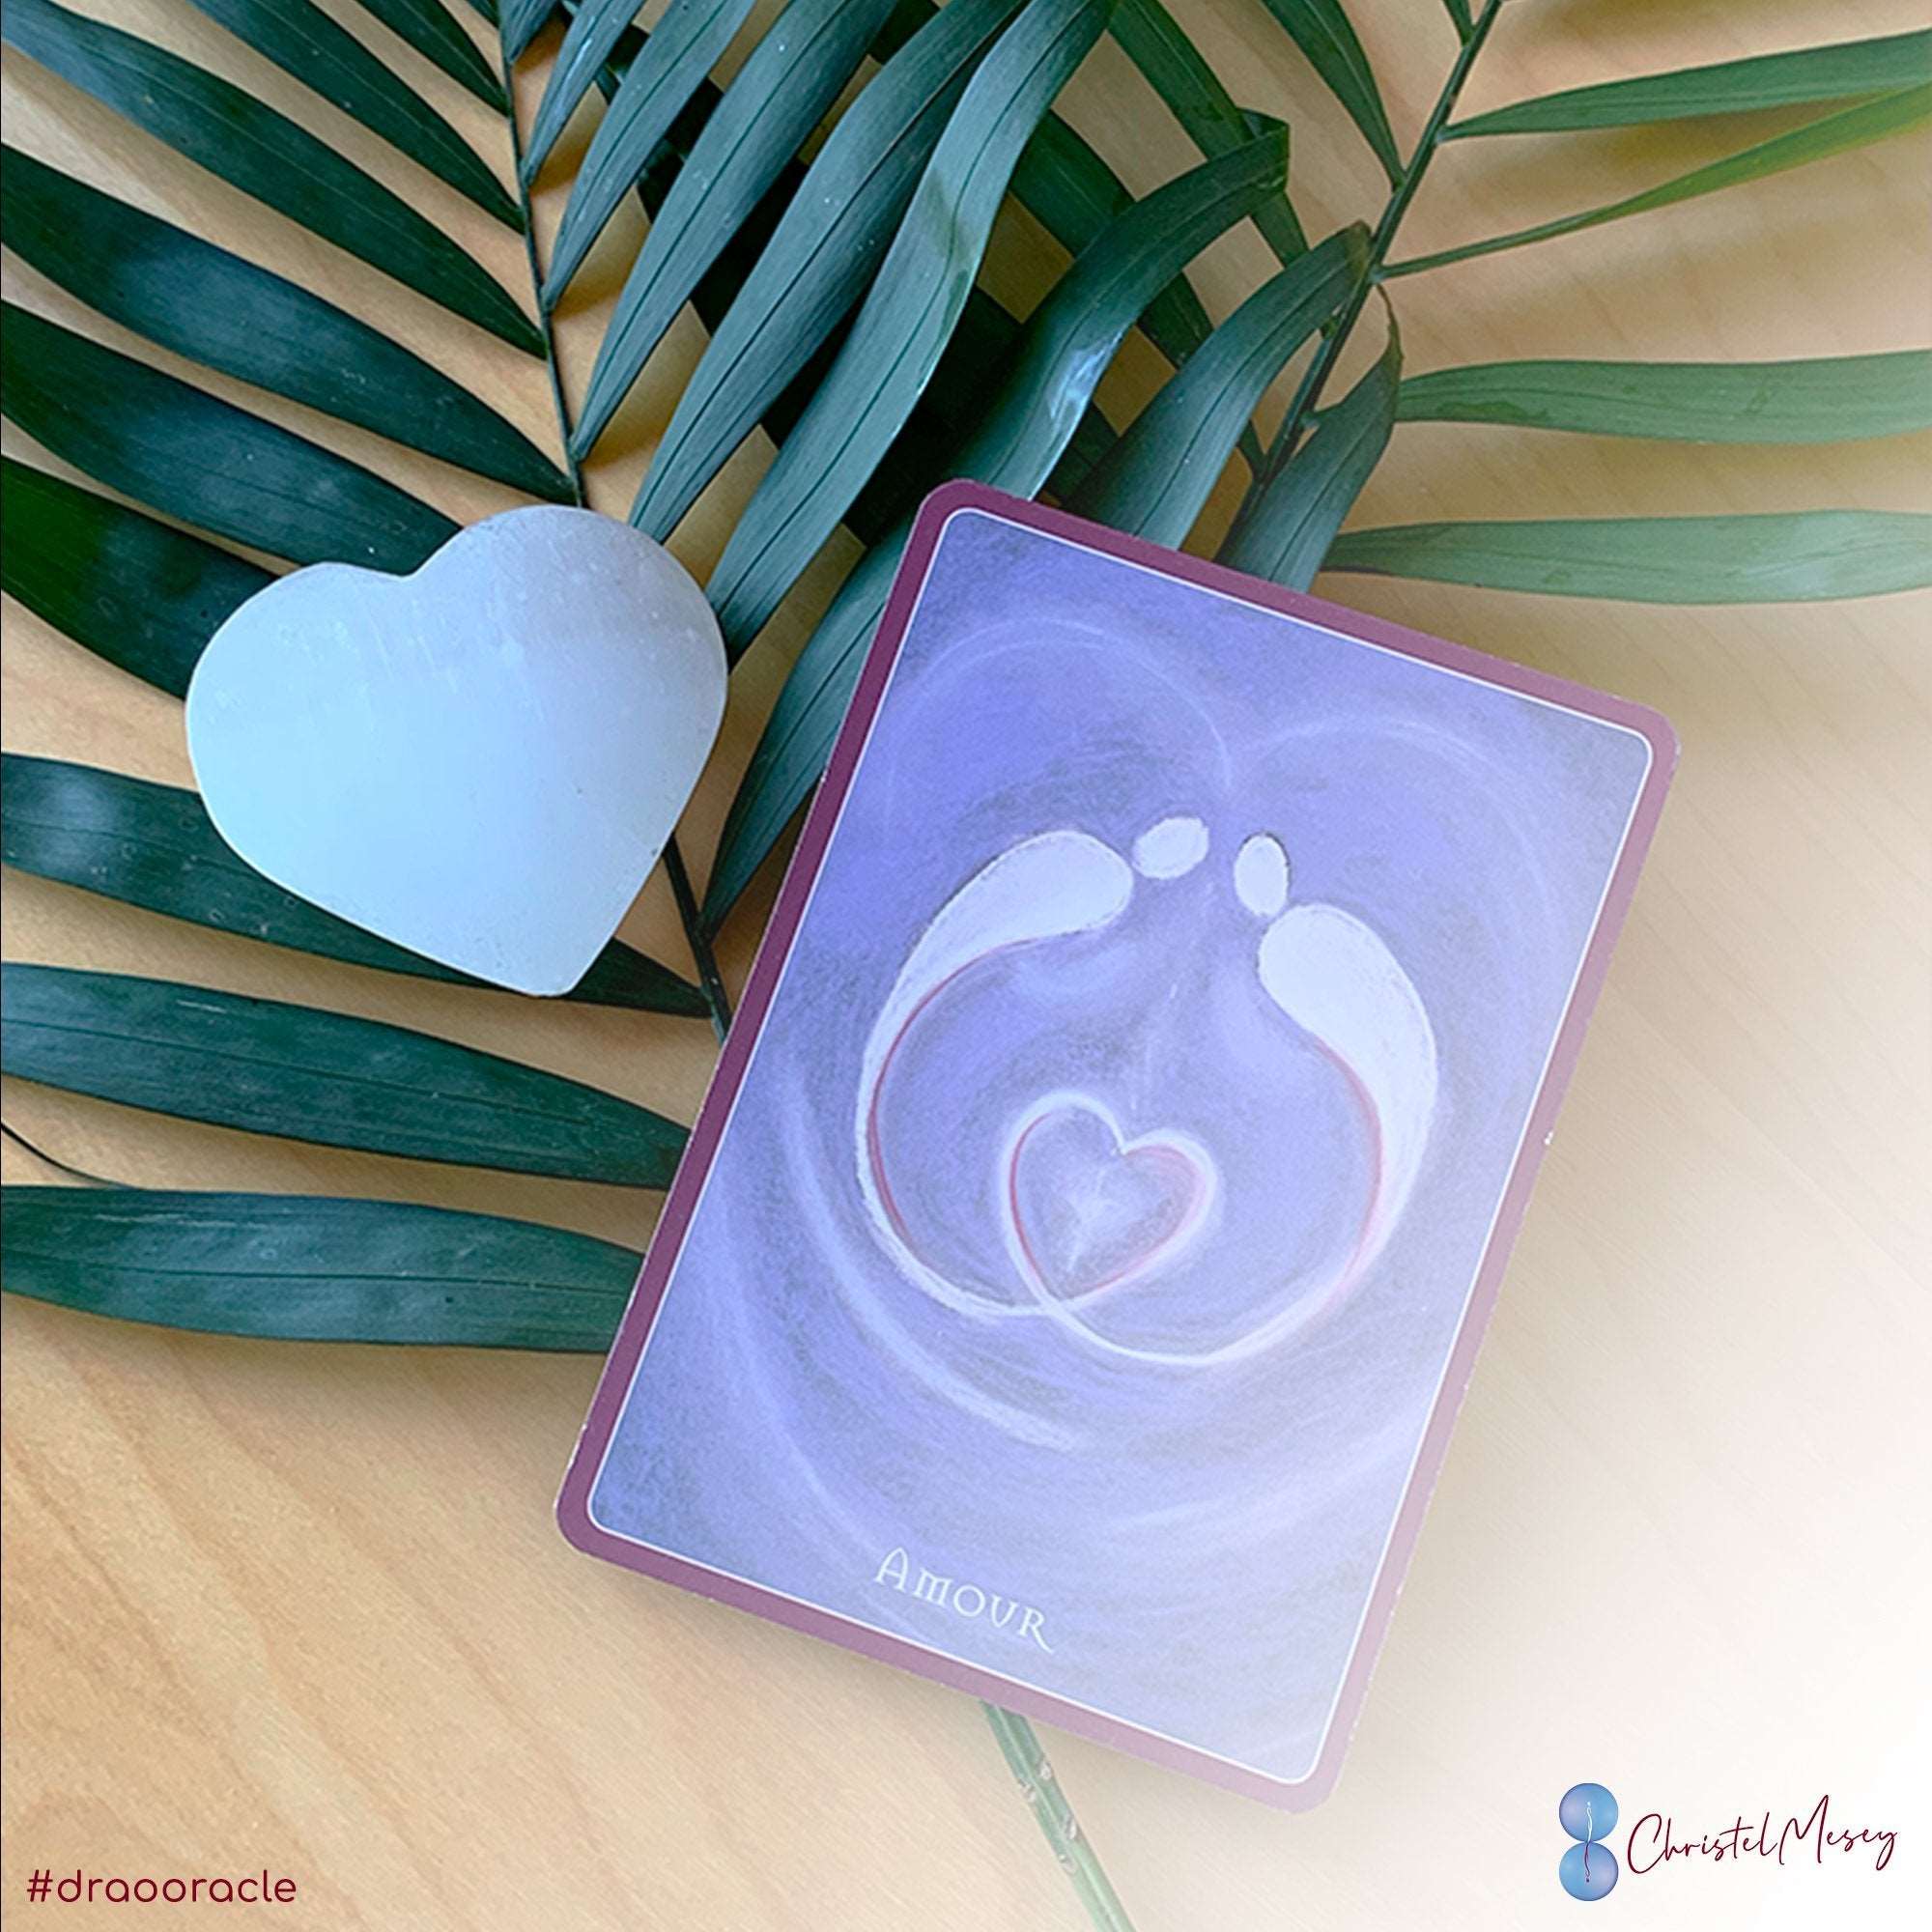 DRAO ORACLE DECK - Personal growth inspirational cards (French AND English) - Christel Mesey Art